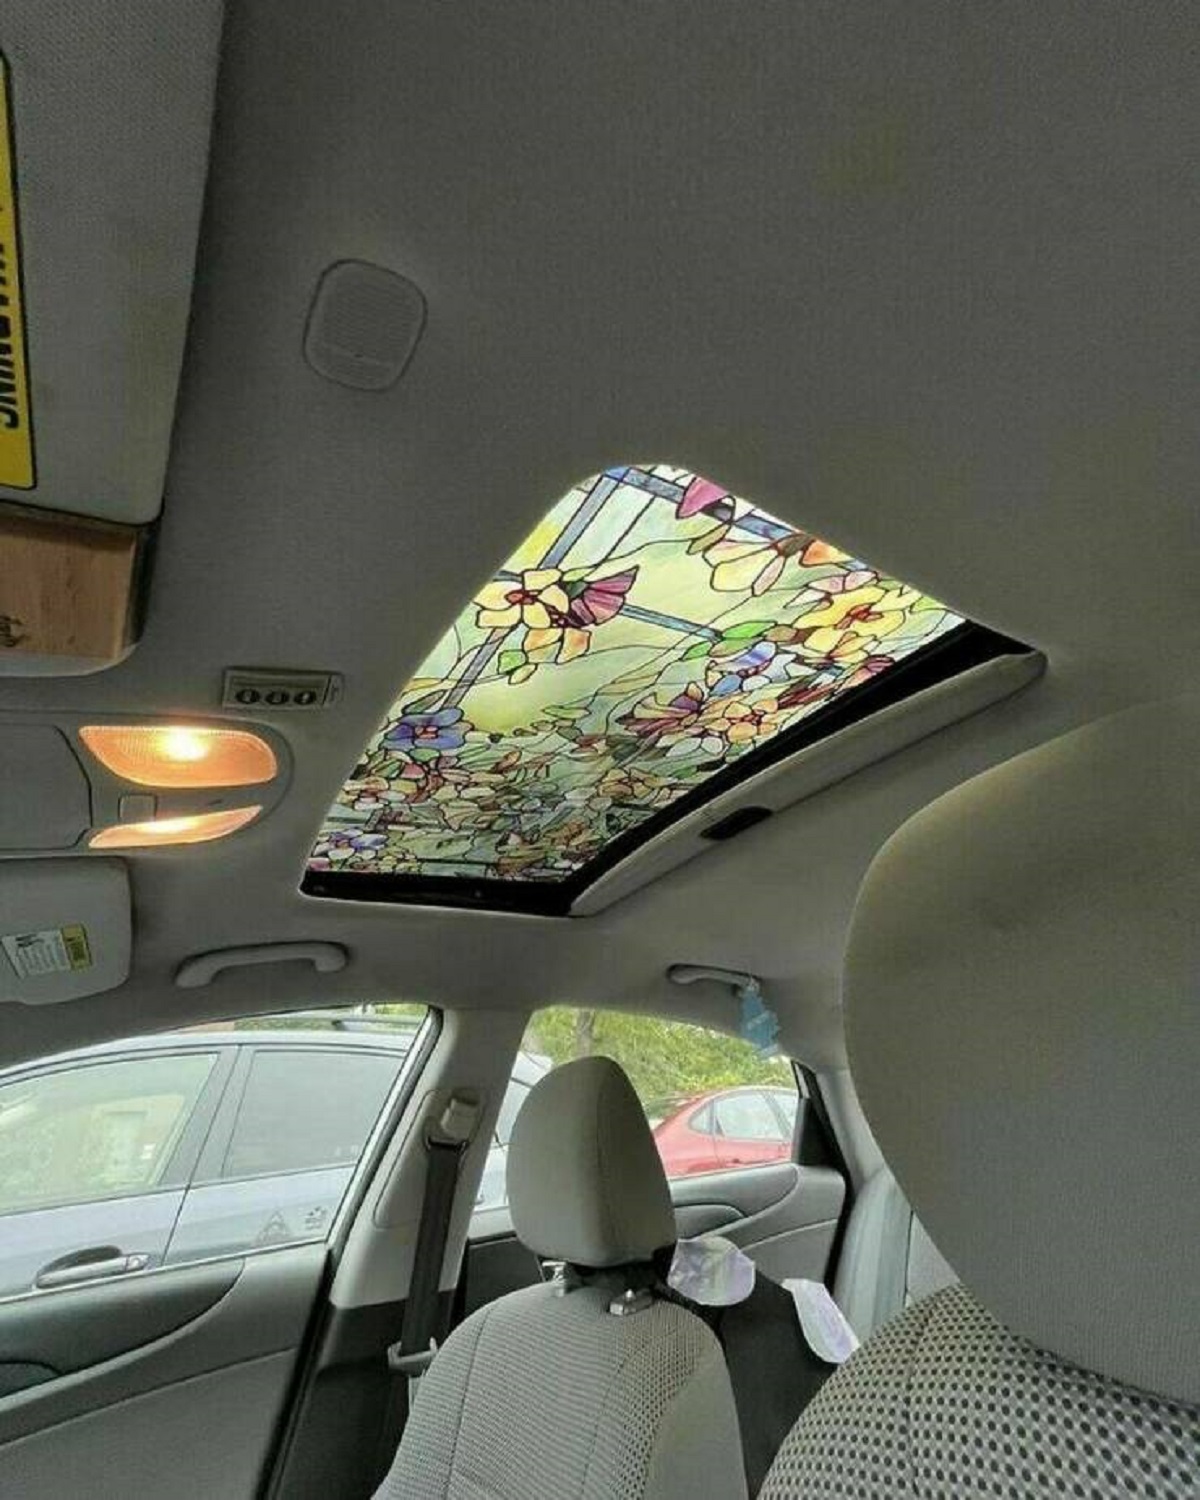 "Stained Glass Sunroof Stickers For Cars"